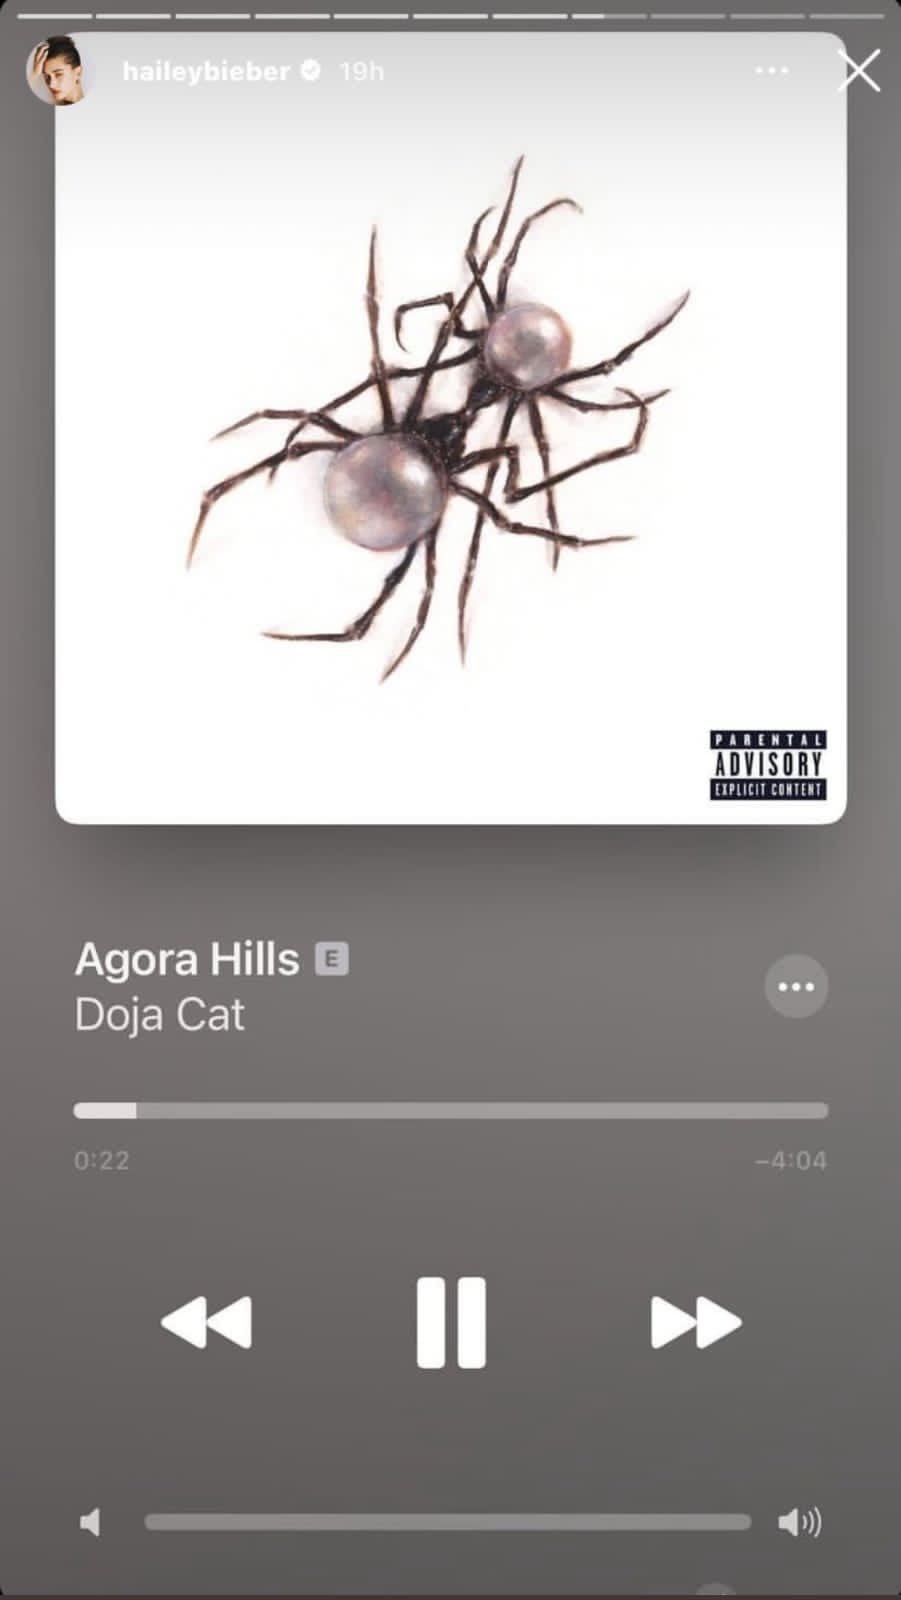 Does Doja Cat's Agoura Hills refer to Backrooms? Exploring the